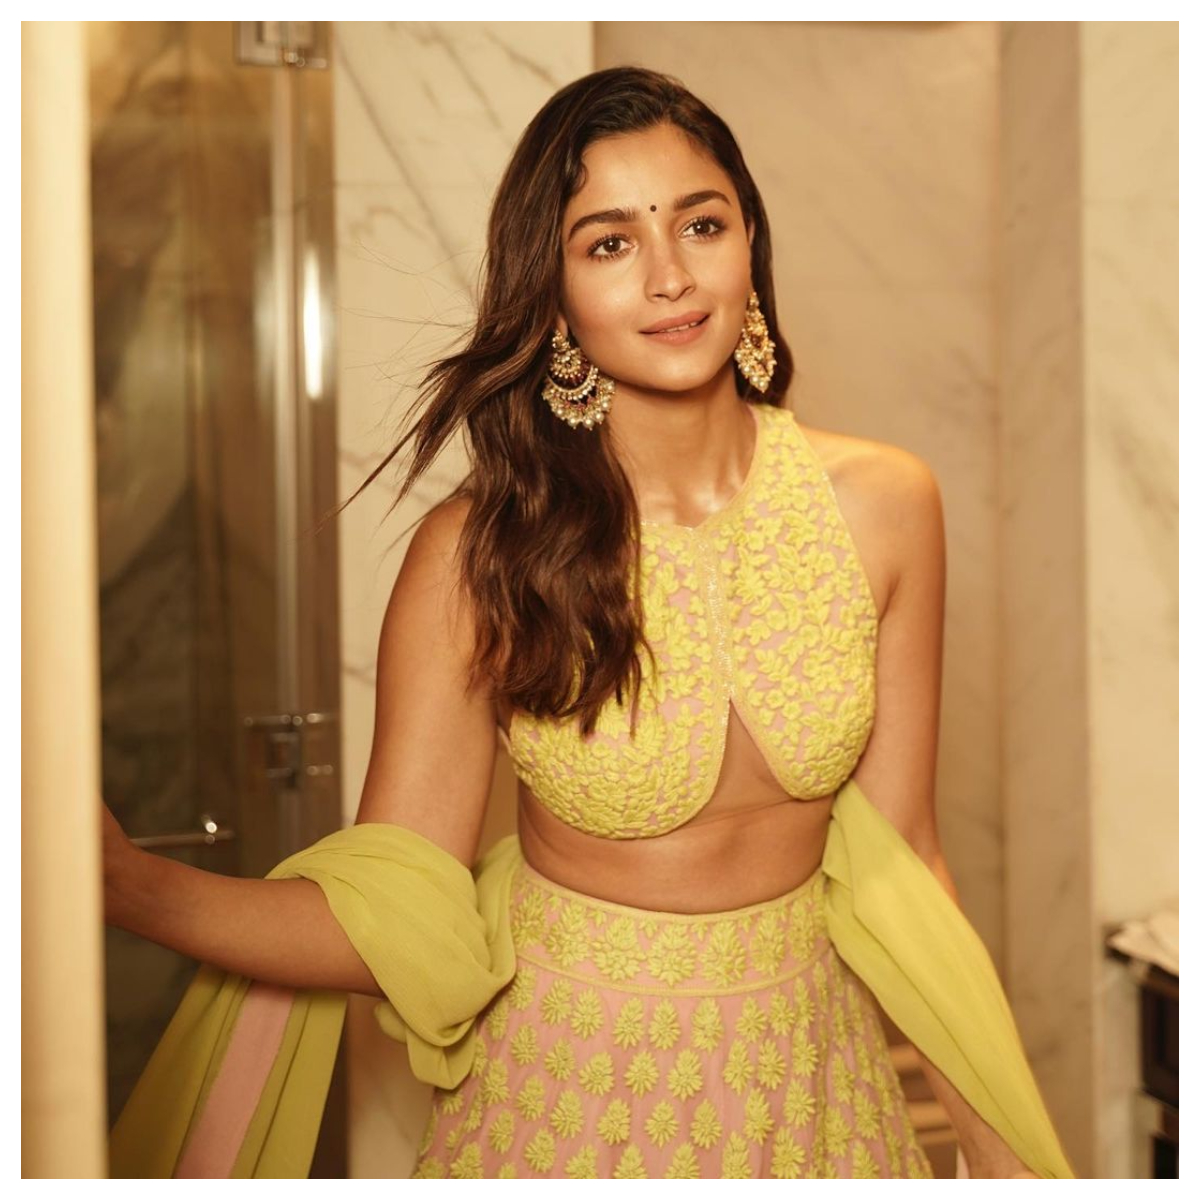 EXCLUSIVE: Alia Bhatt to fly to Jaisalmer for her upcoming film's shoot post wedding with Ranbir Kapoor